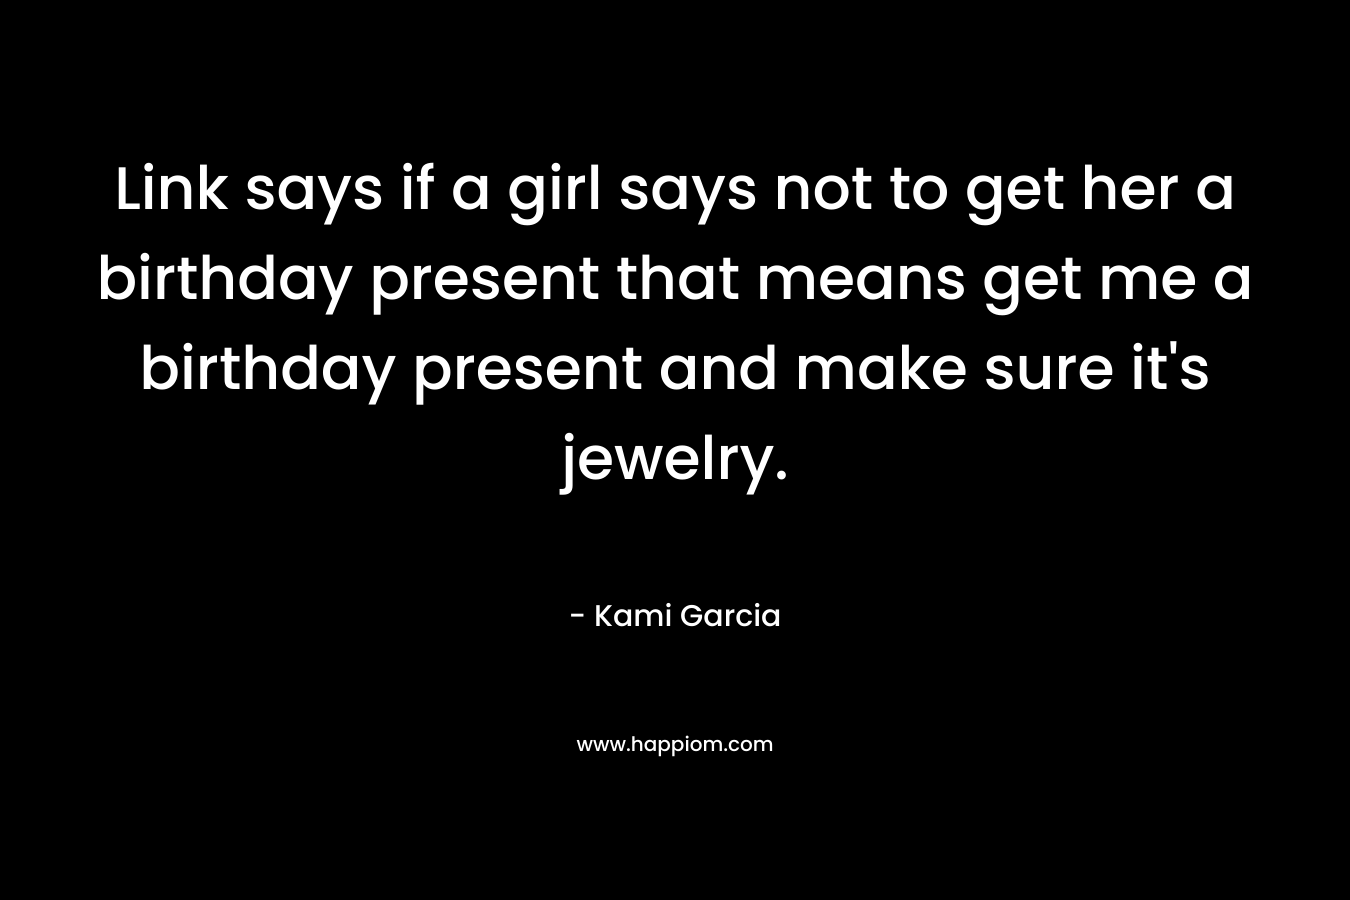 Link says if a girl says not to get her a birthday present that means get me a birthday present and make sure it’s jewelry. – Kami Garcia